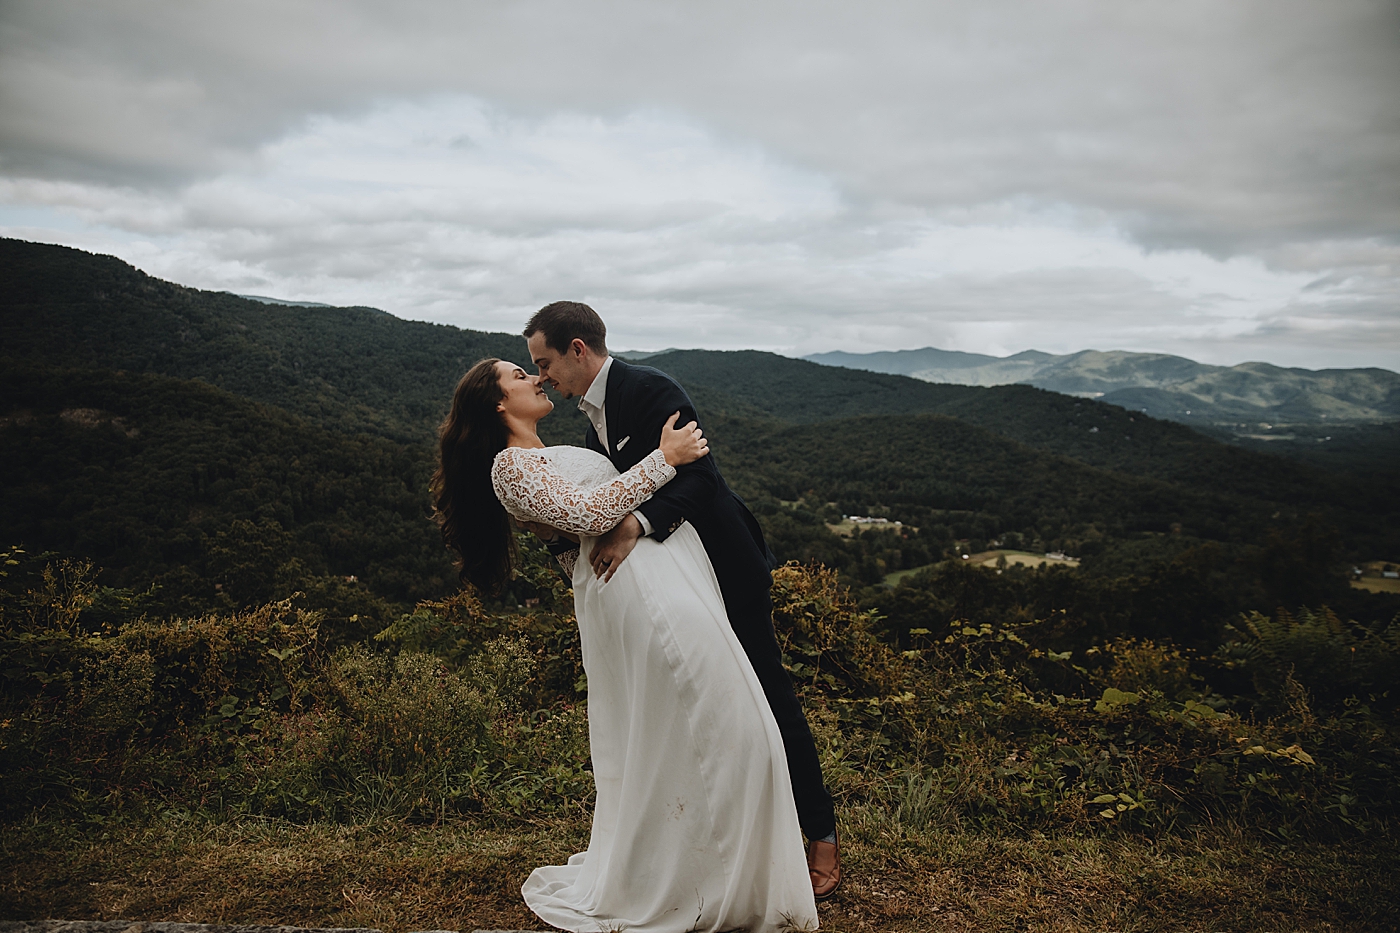 Bride and Groom dipping with mountains behind them Catawba Falls Asheville, NC Elopement Photography captured by Maggie Alvarez Photography